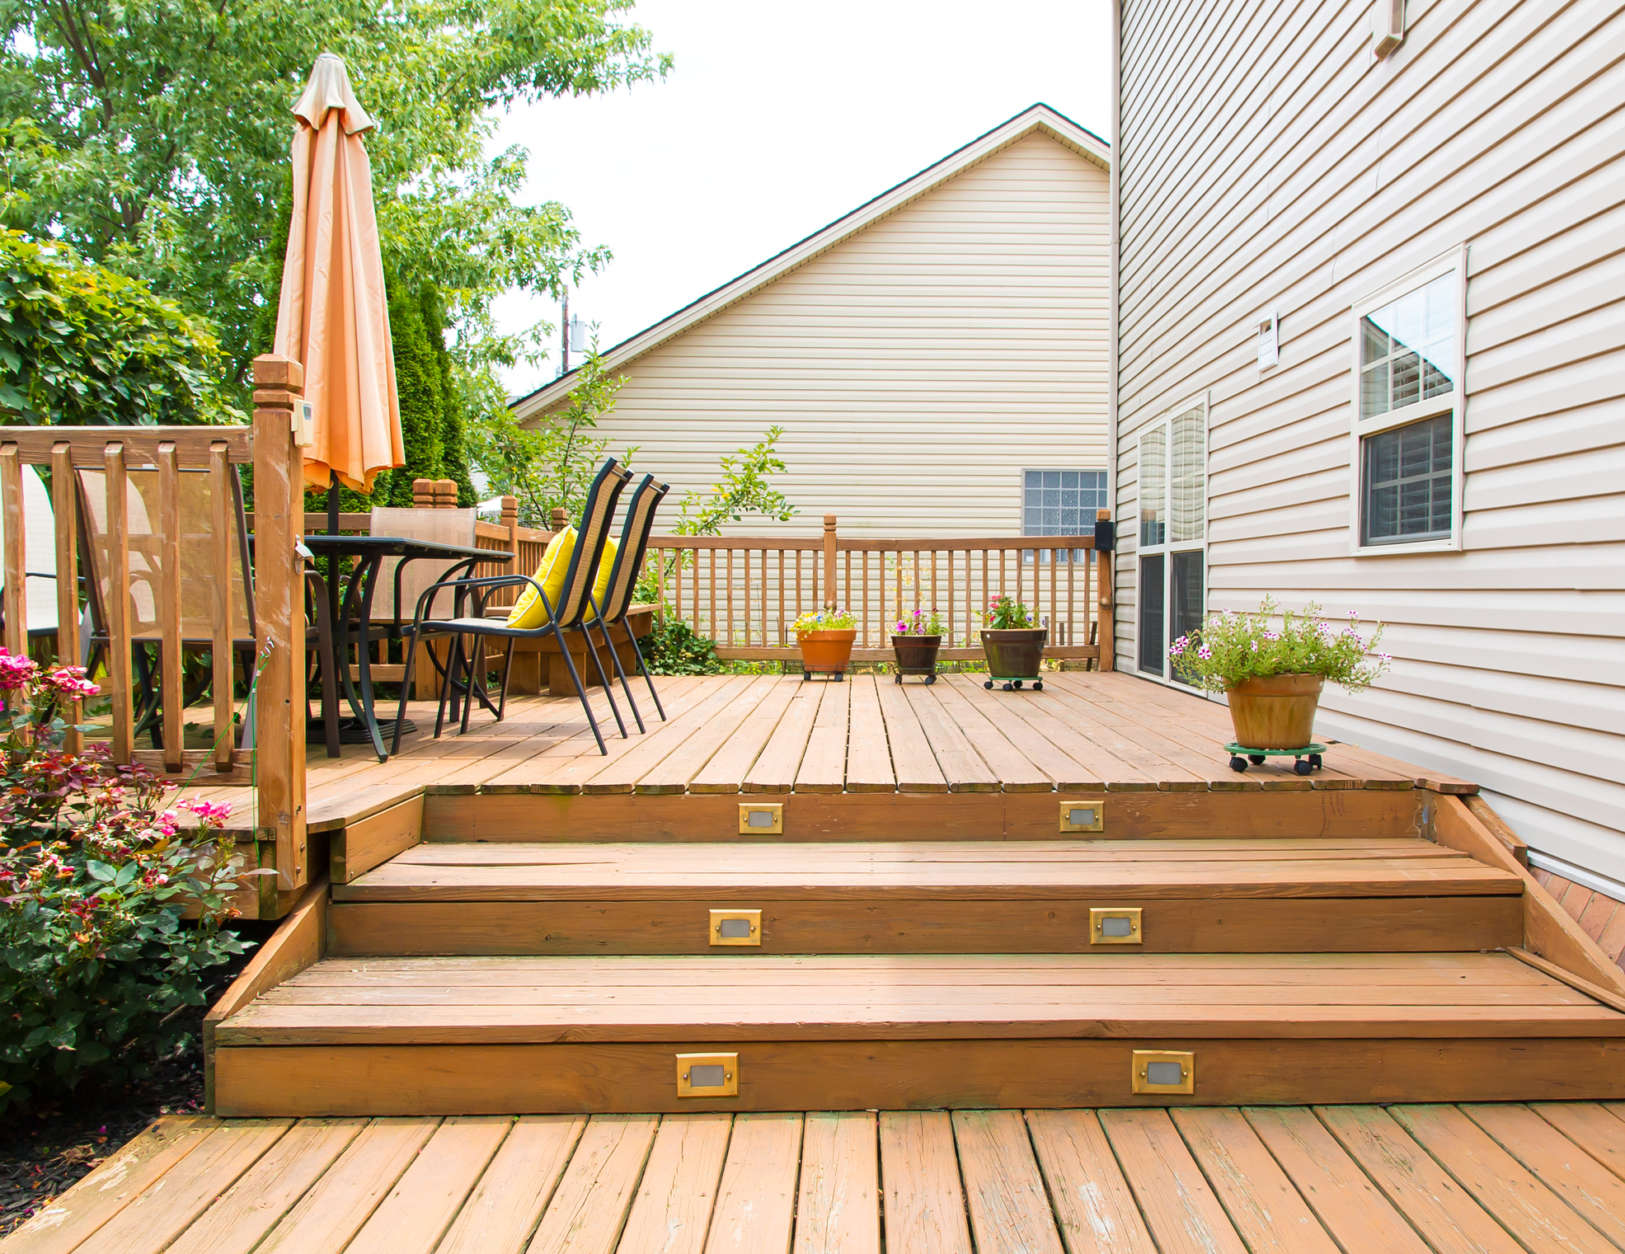 Carpenter bees attacking your wooden deck or porch? Mike McGrath suggests homeowners try building the bees an alternative habitat, almond oil can also help. But applying a paint or wood stain will be the only long-term solution to stop those pollinators in their tracks. (Thinkstock)